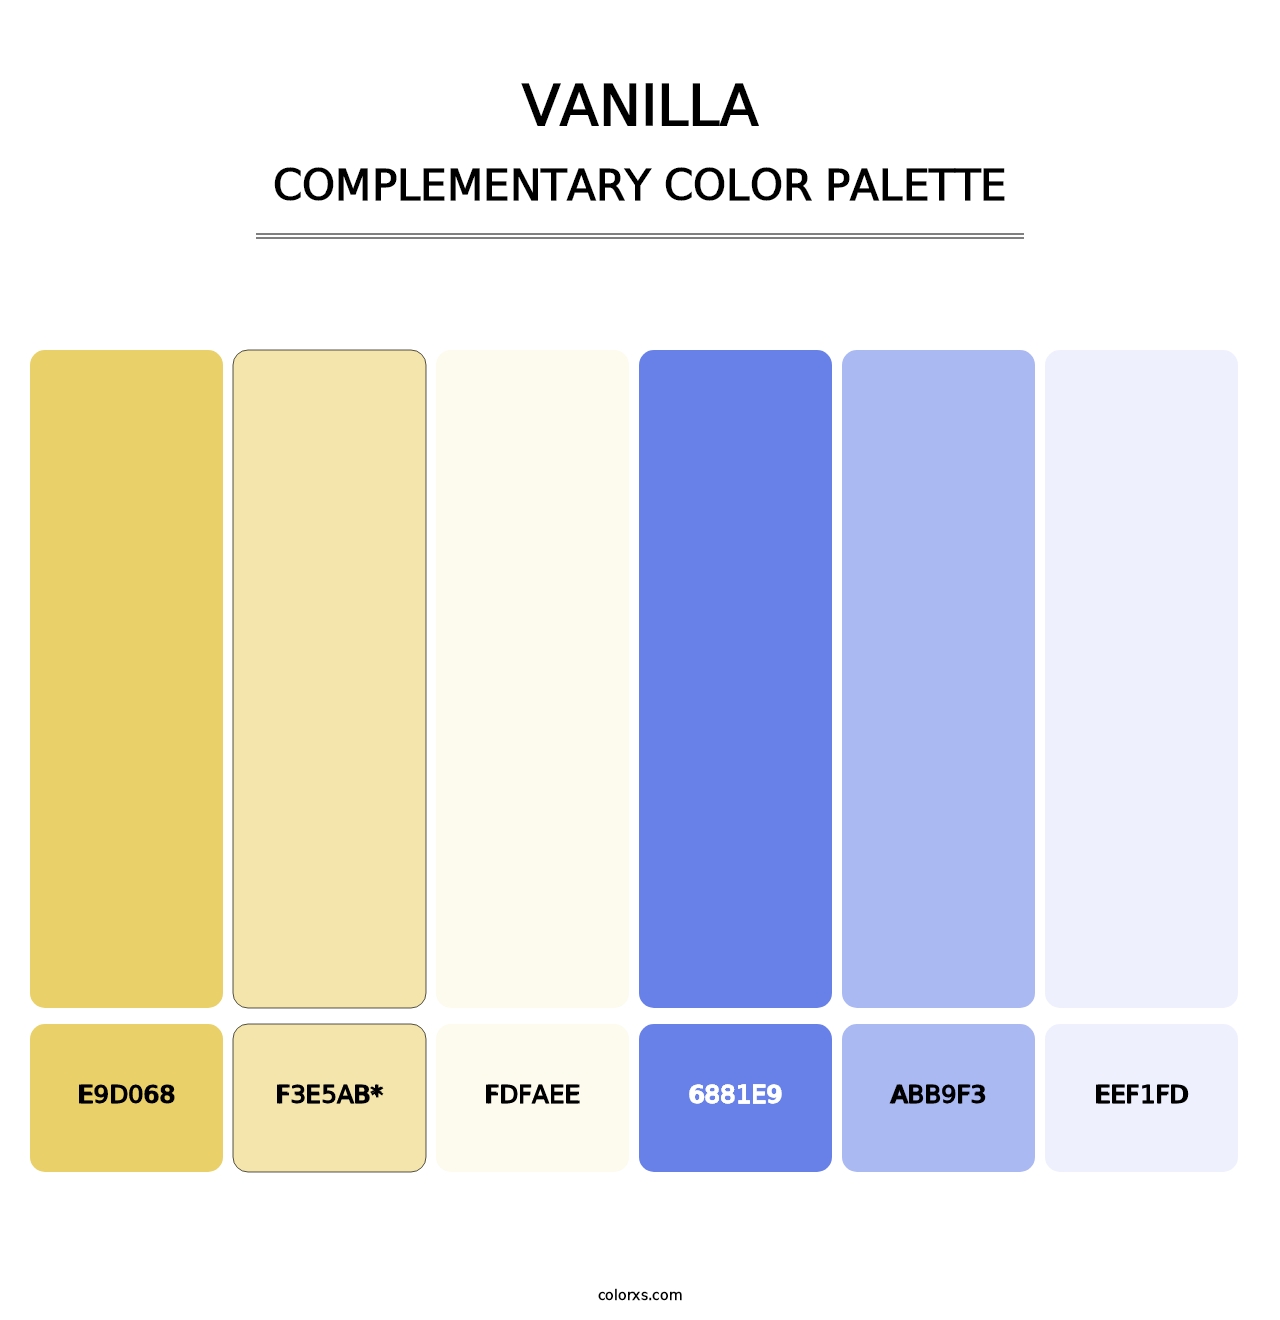 Vanilla - Complementary Color Palette